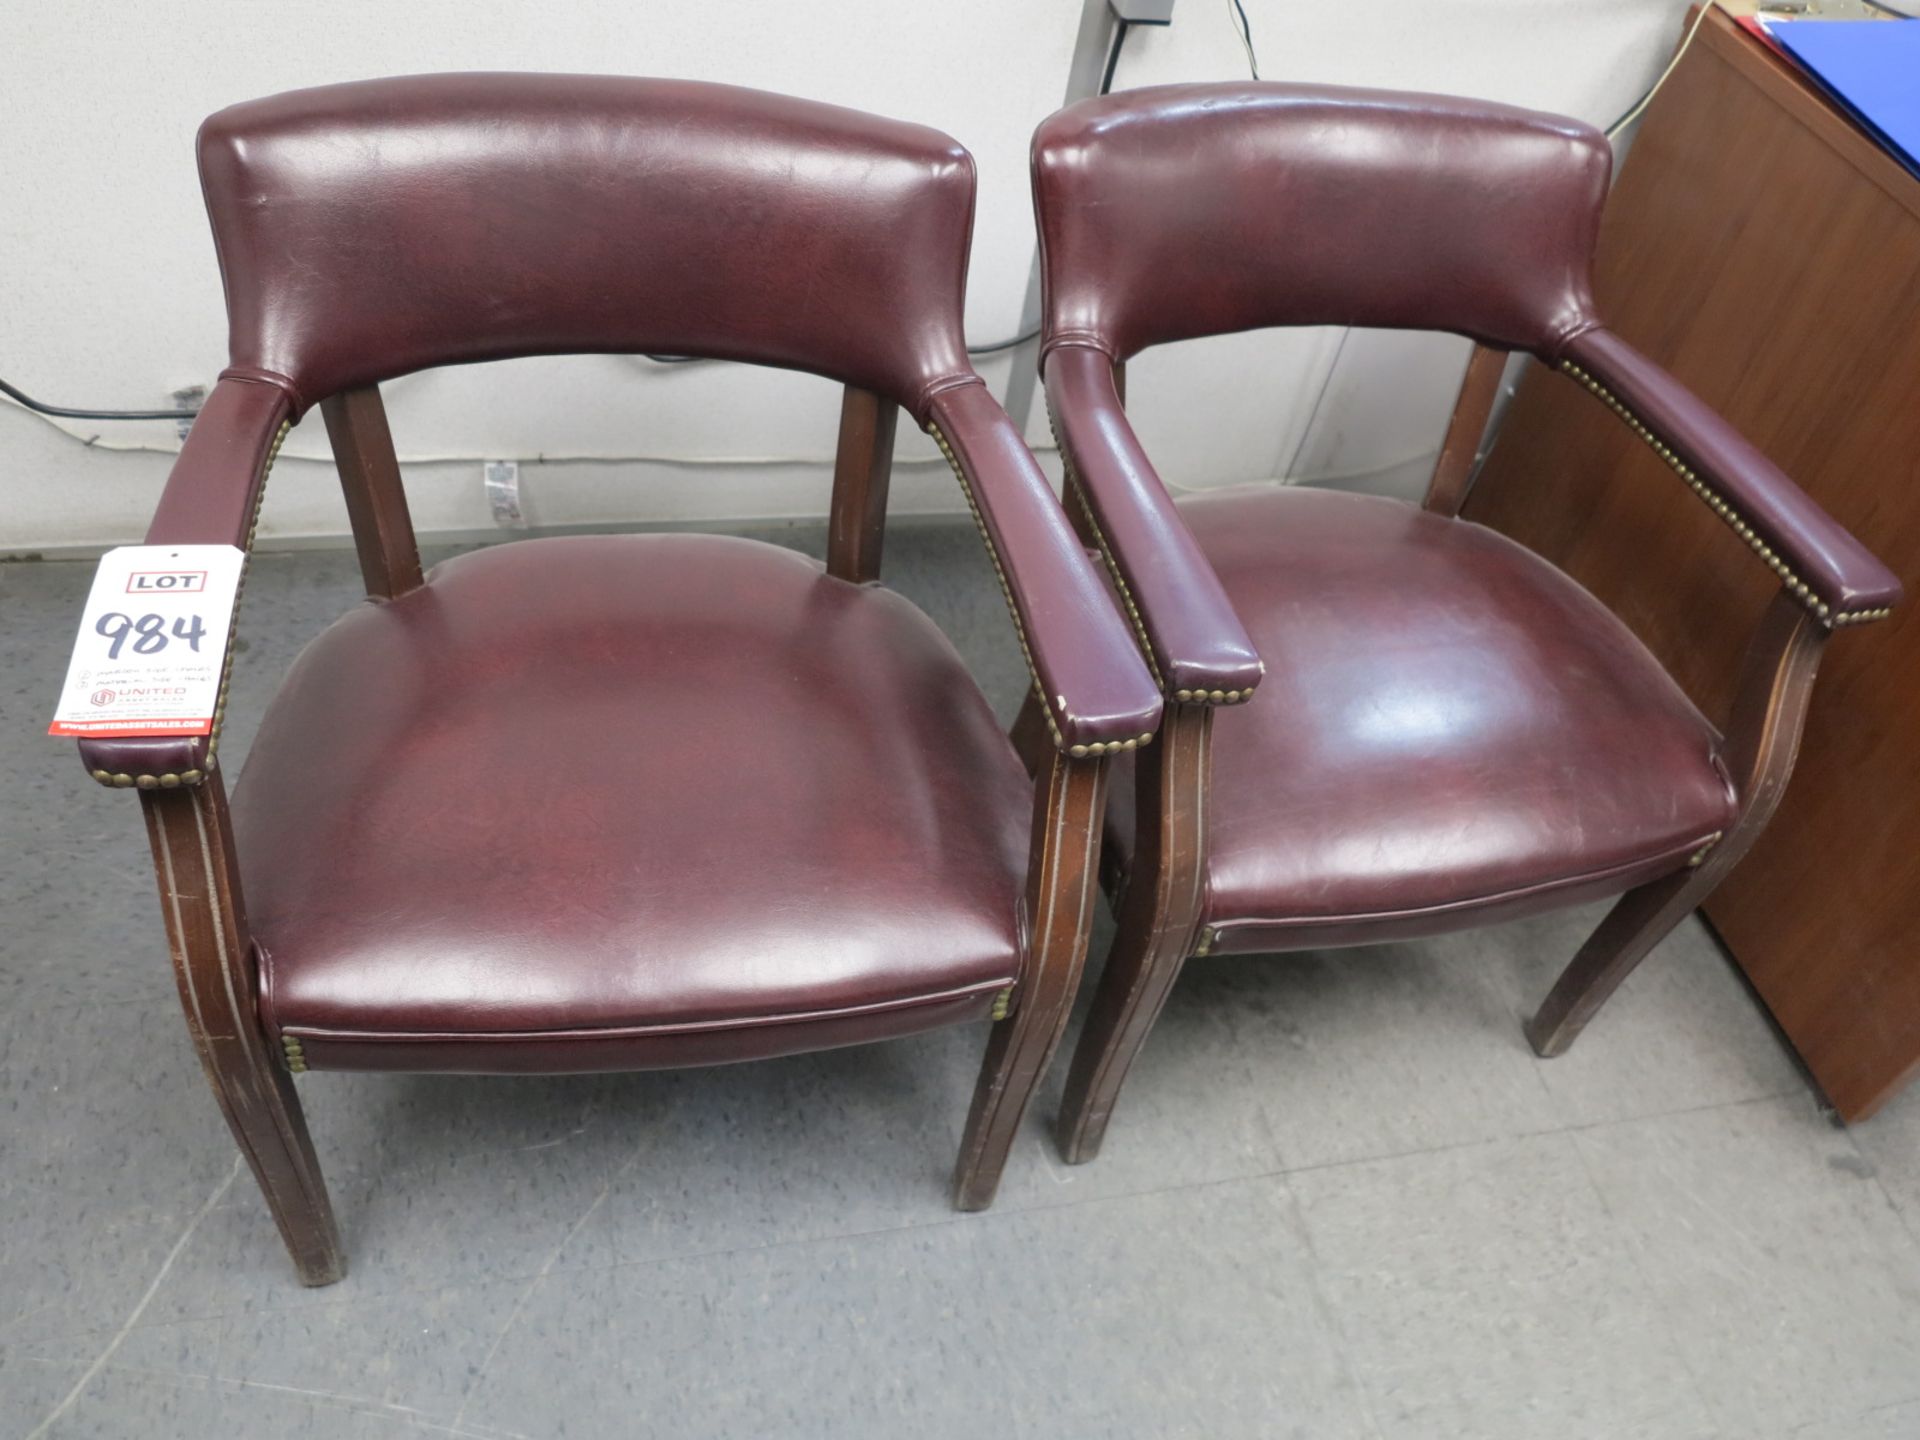 LOT - (2) MATCHING BURGUNDY SIDE CHAIRS AND (2) MATCHING GRAY SIDE CHAIRS